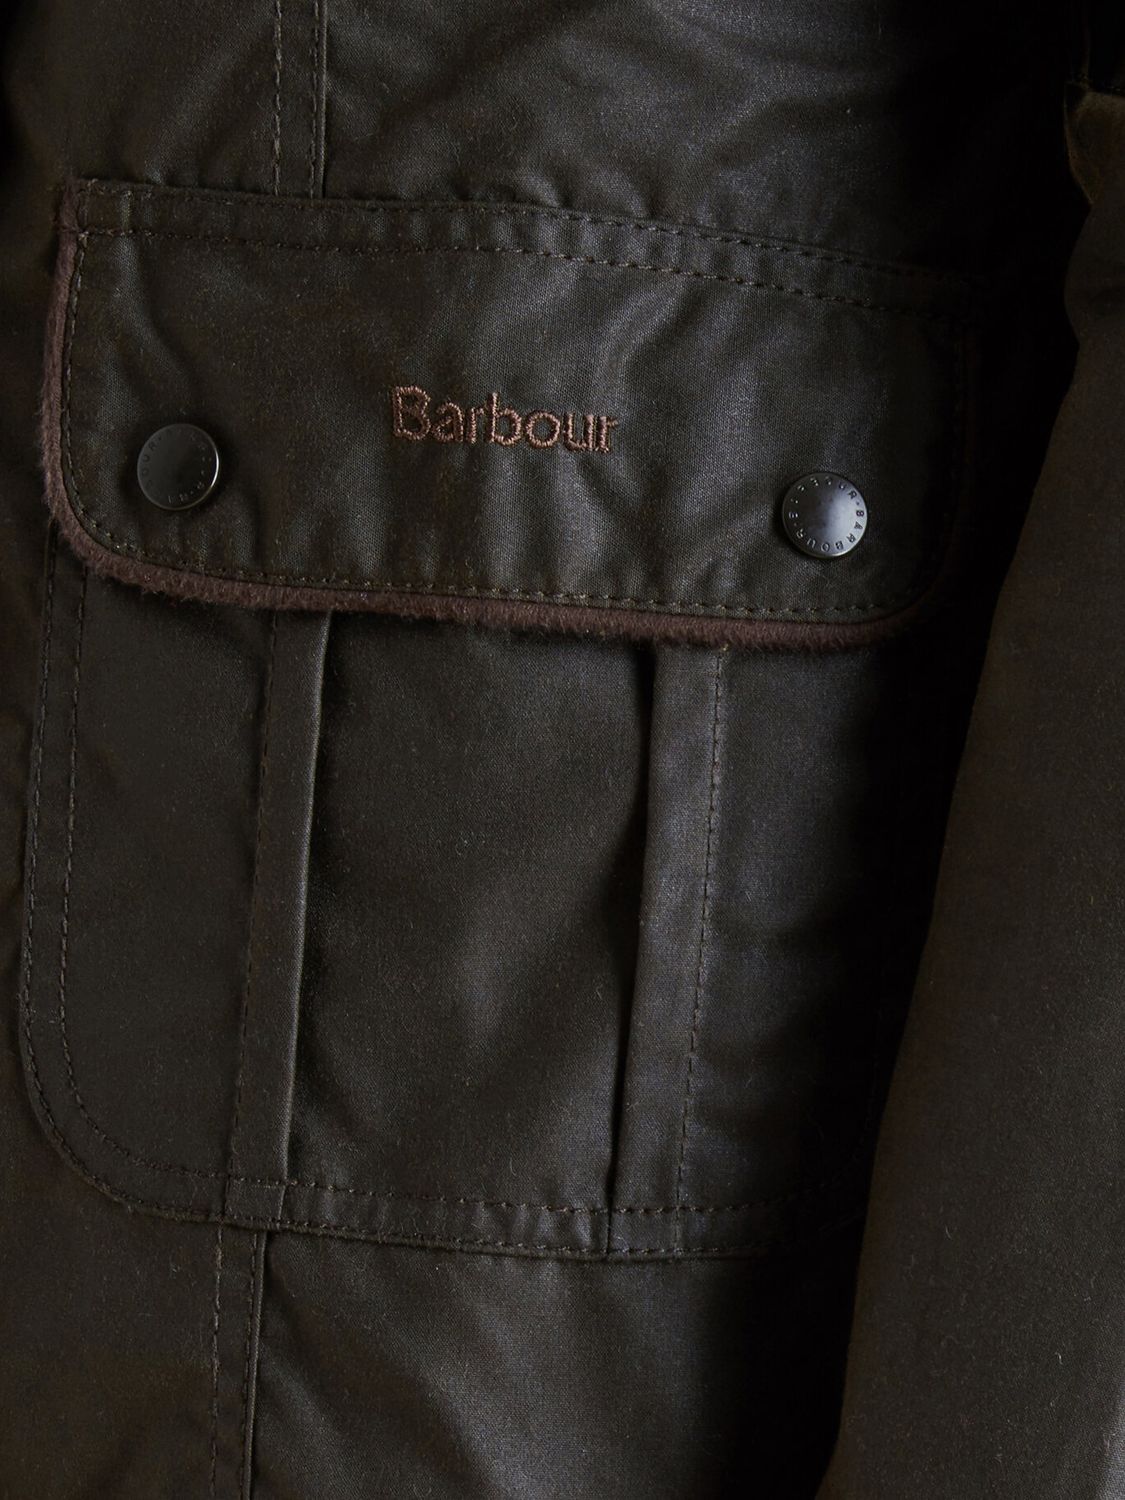 Barbour Utility Waxed Jacket, Olive at John Lewis & Partners